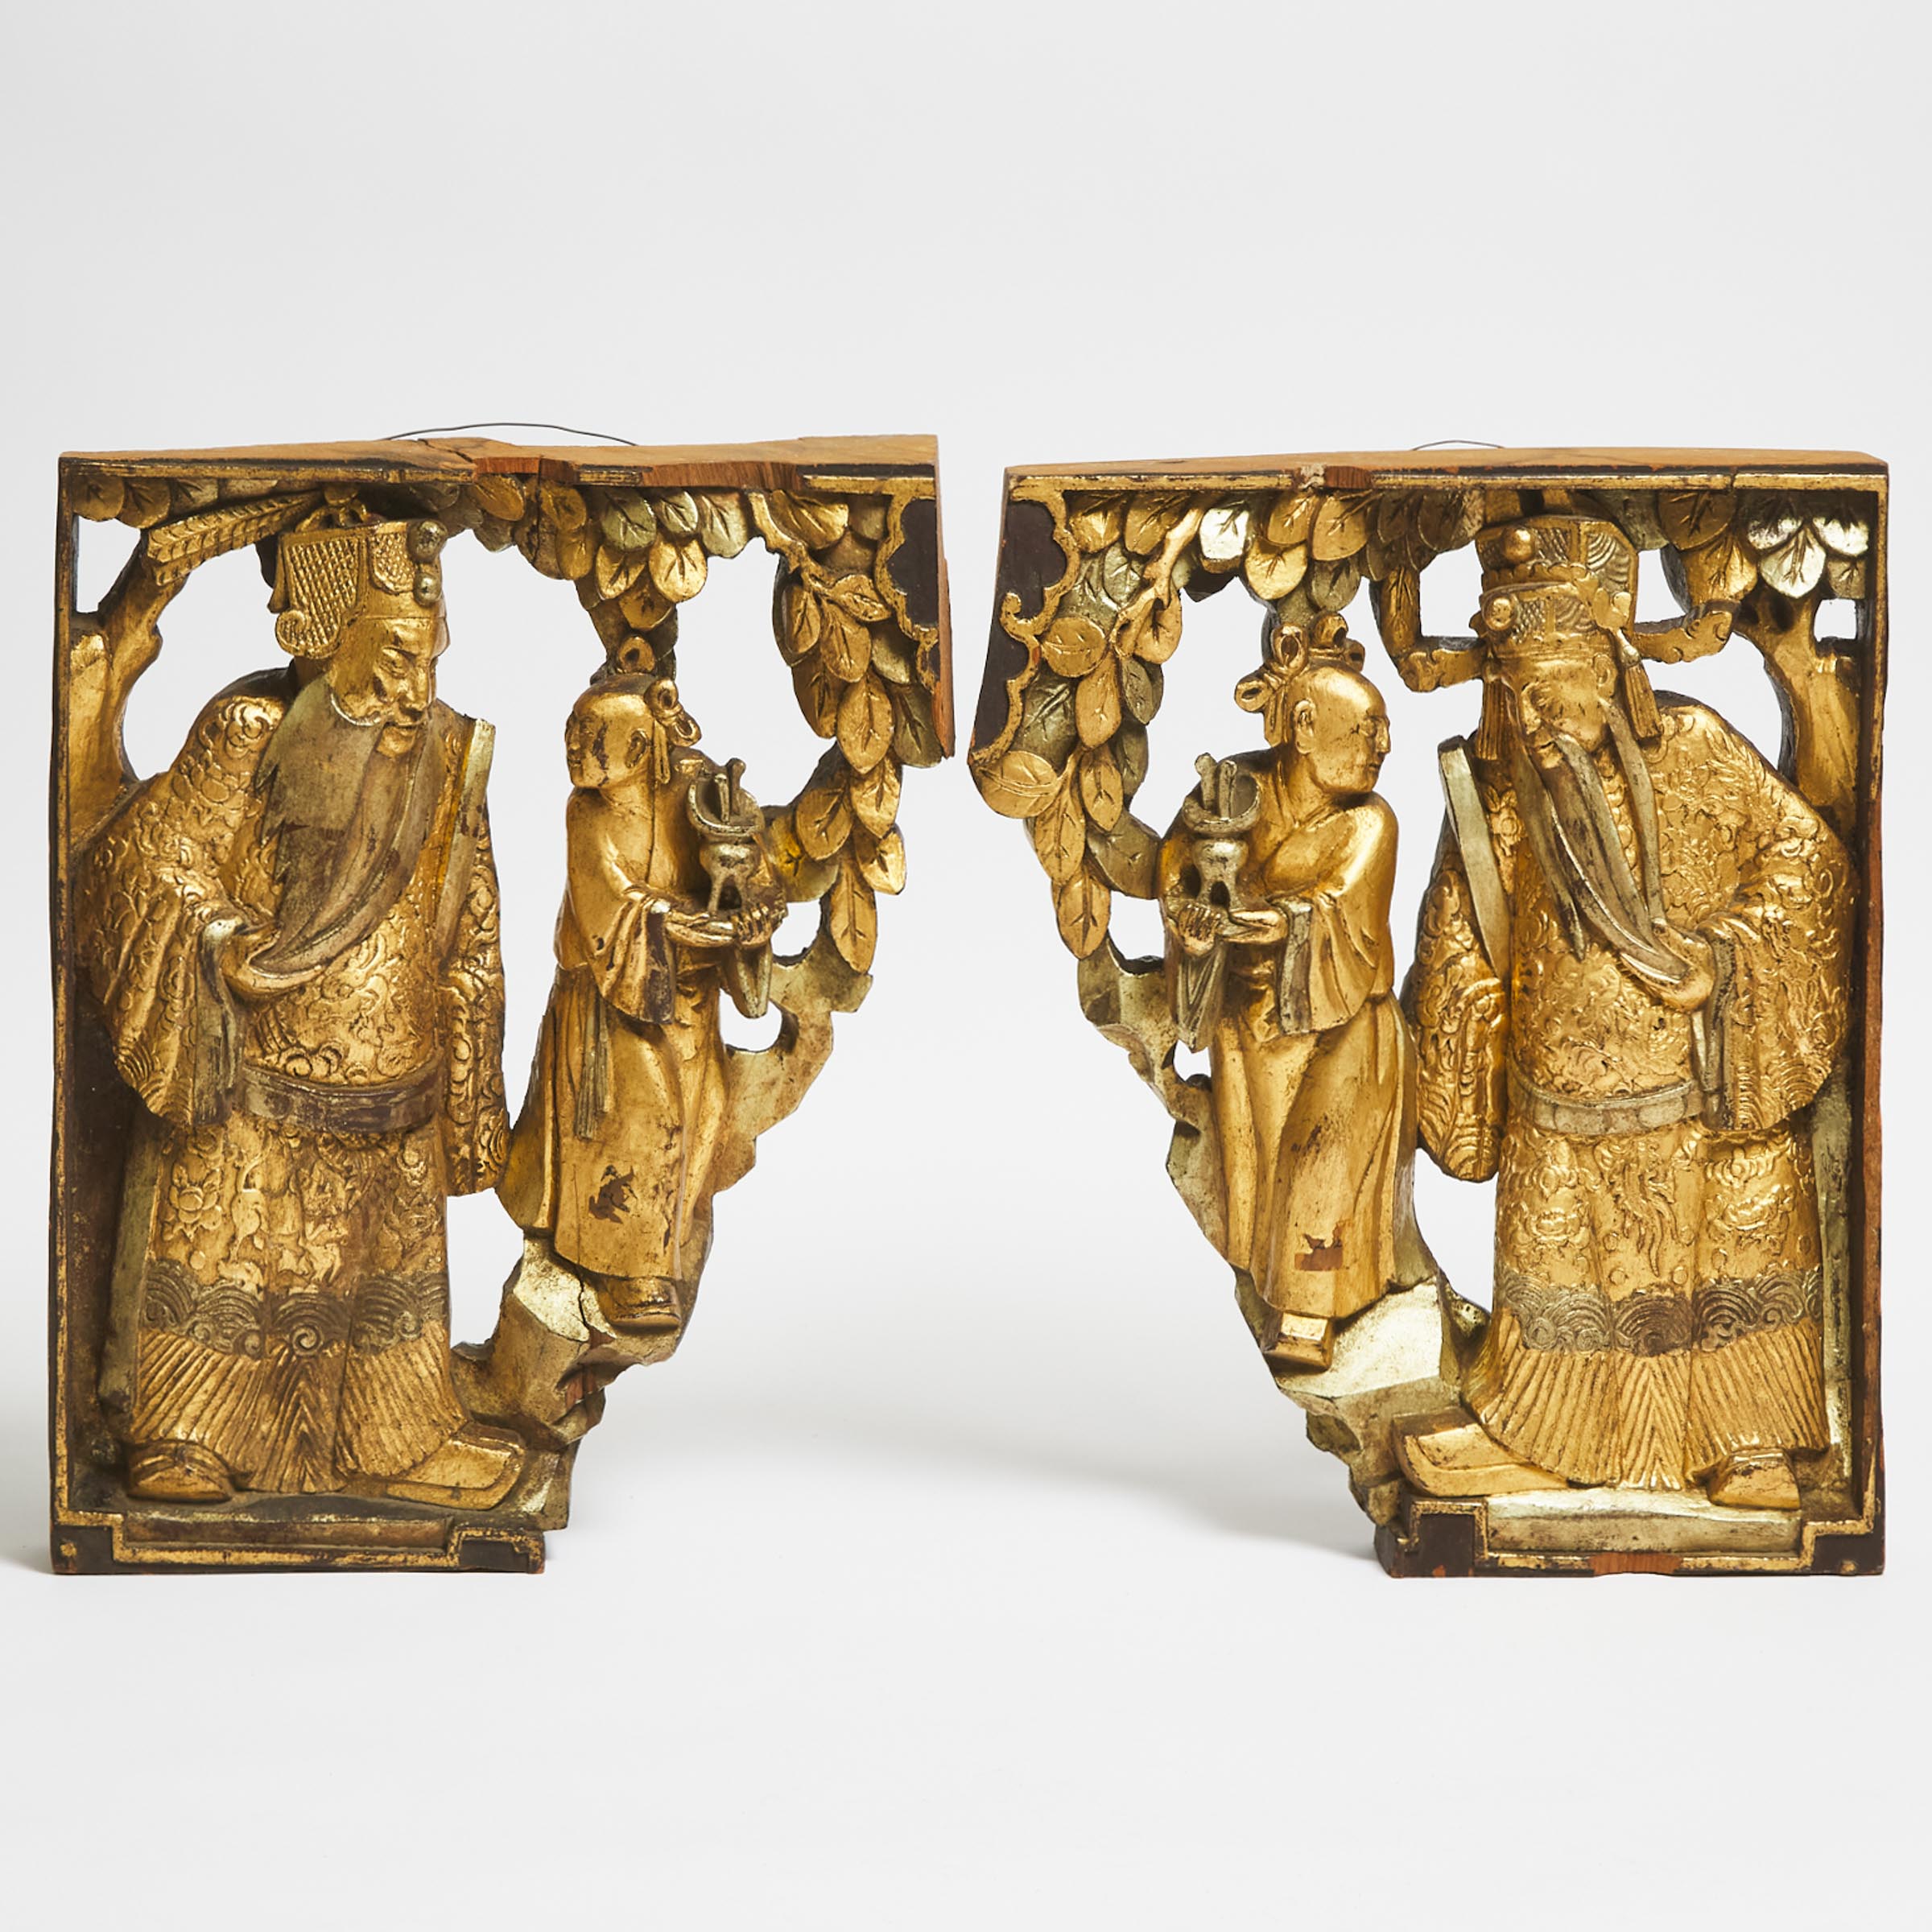 Two Large Gilt Wood Architectural 'Figural' Brackets, 19th Century